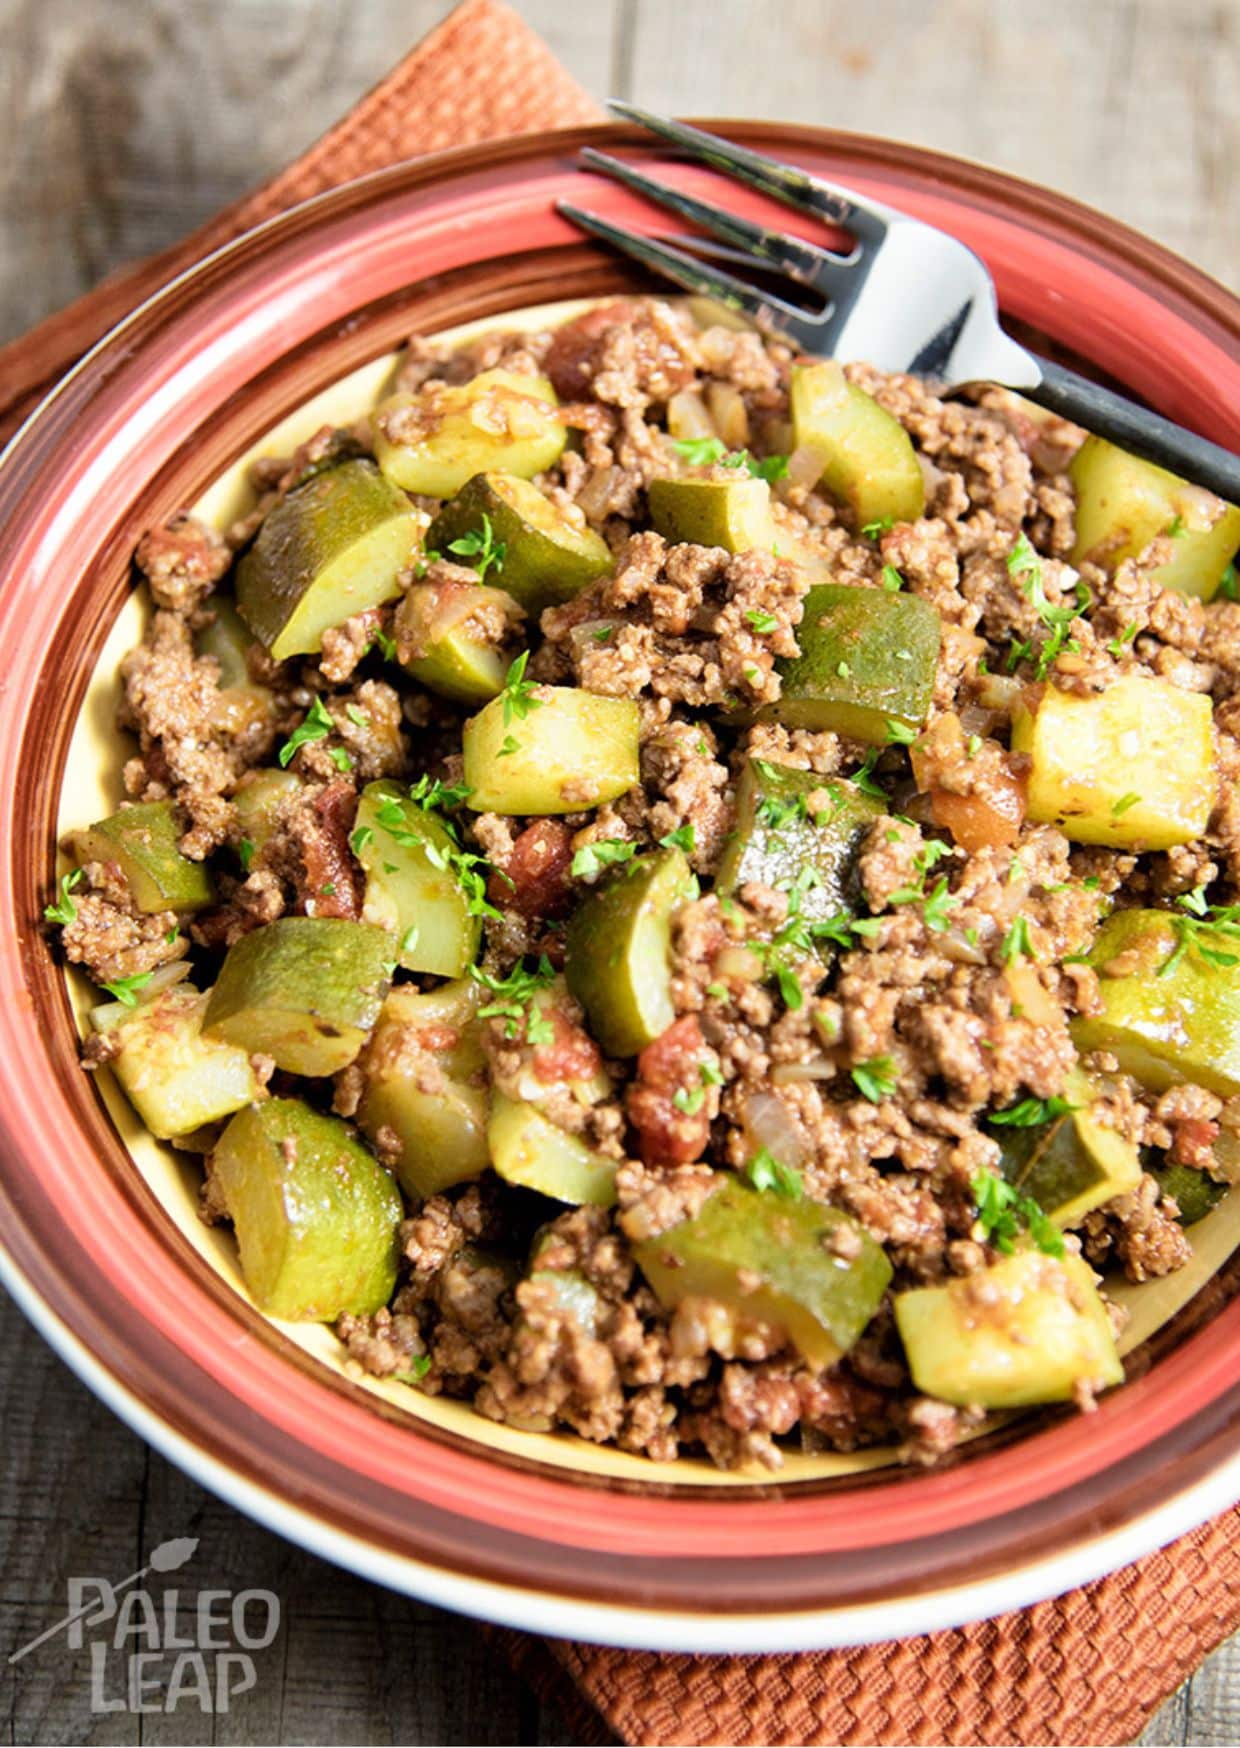 Deep South Dish: Ground Beef and Squash Skillet